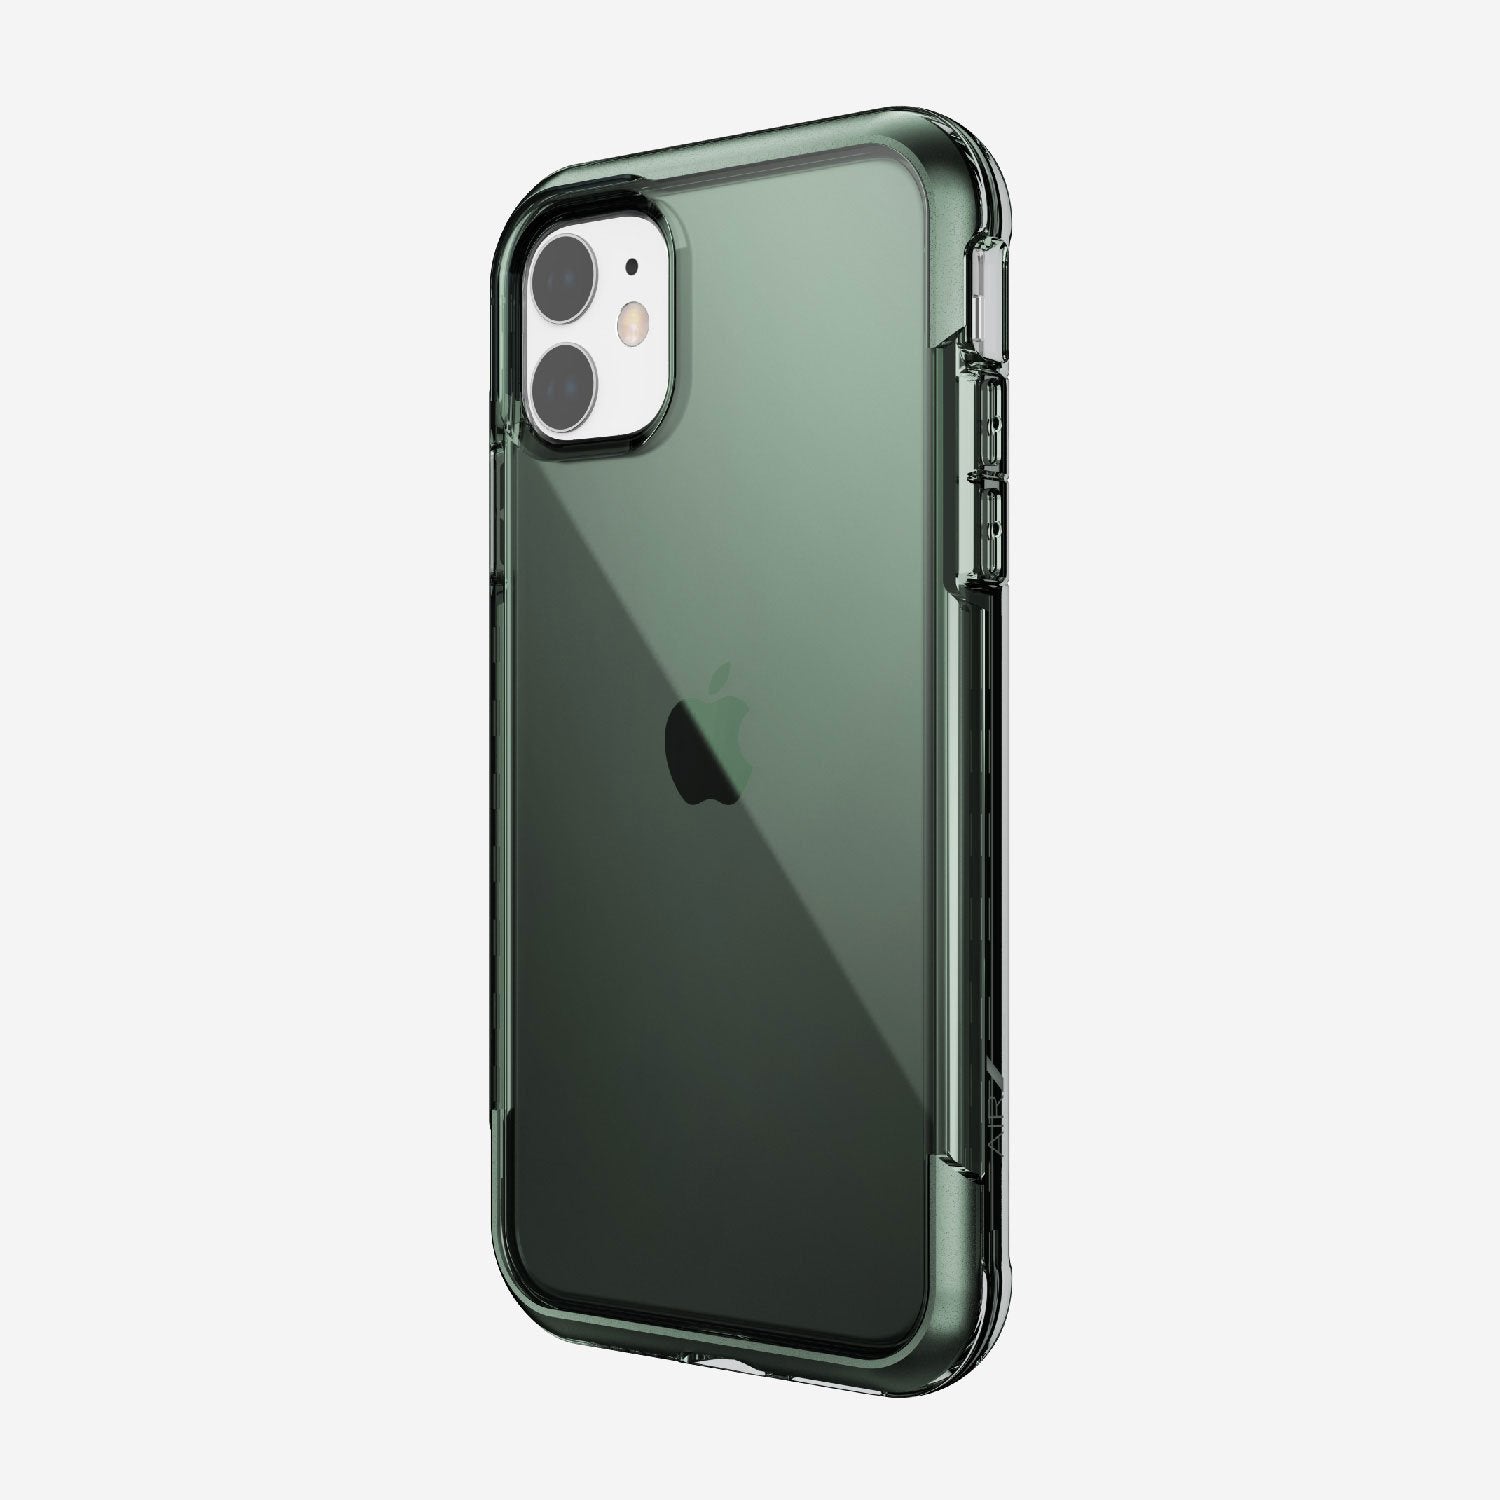 The Raptic AIR case for iPhone 11 Pro provides drop protection in green.